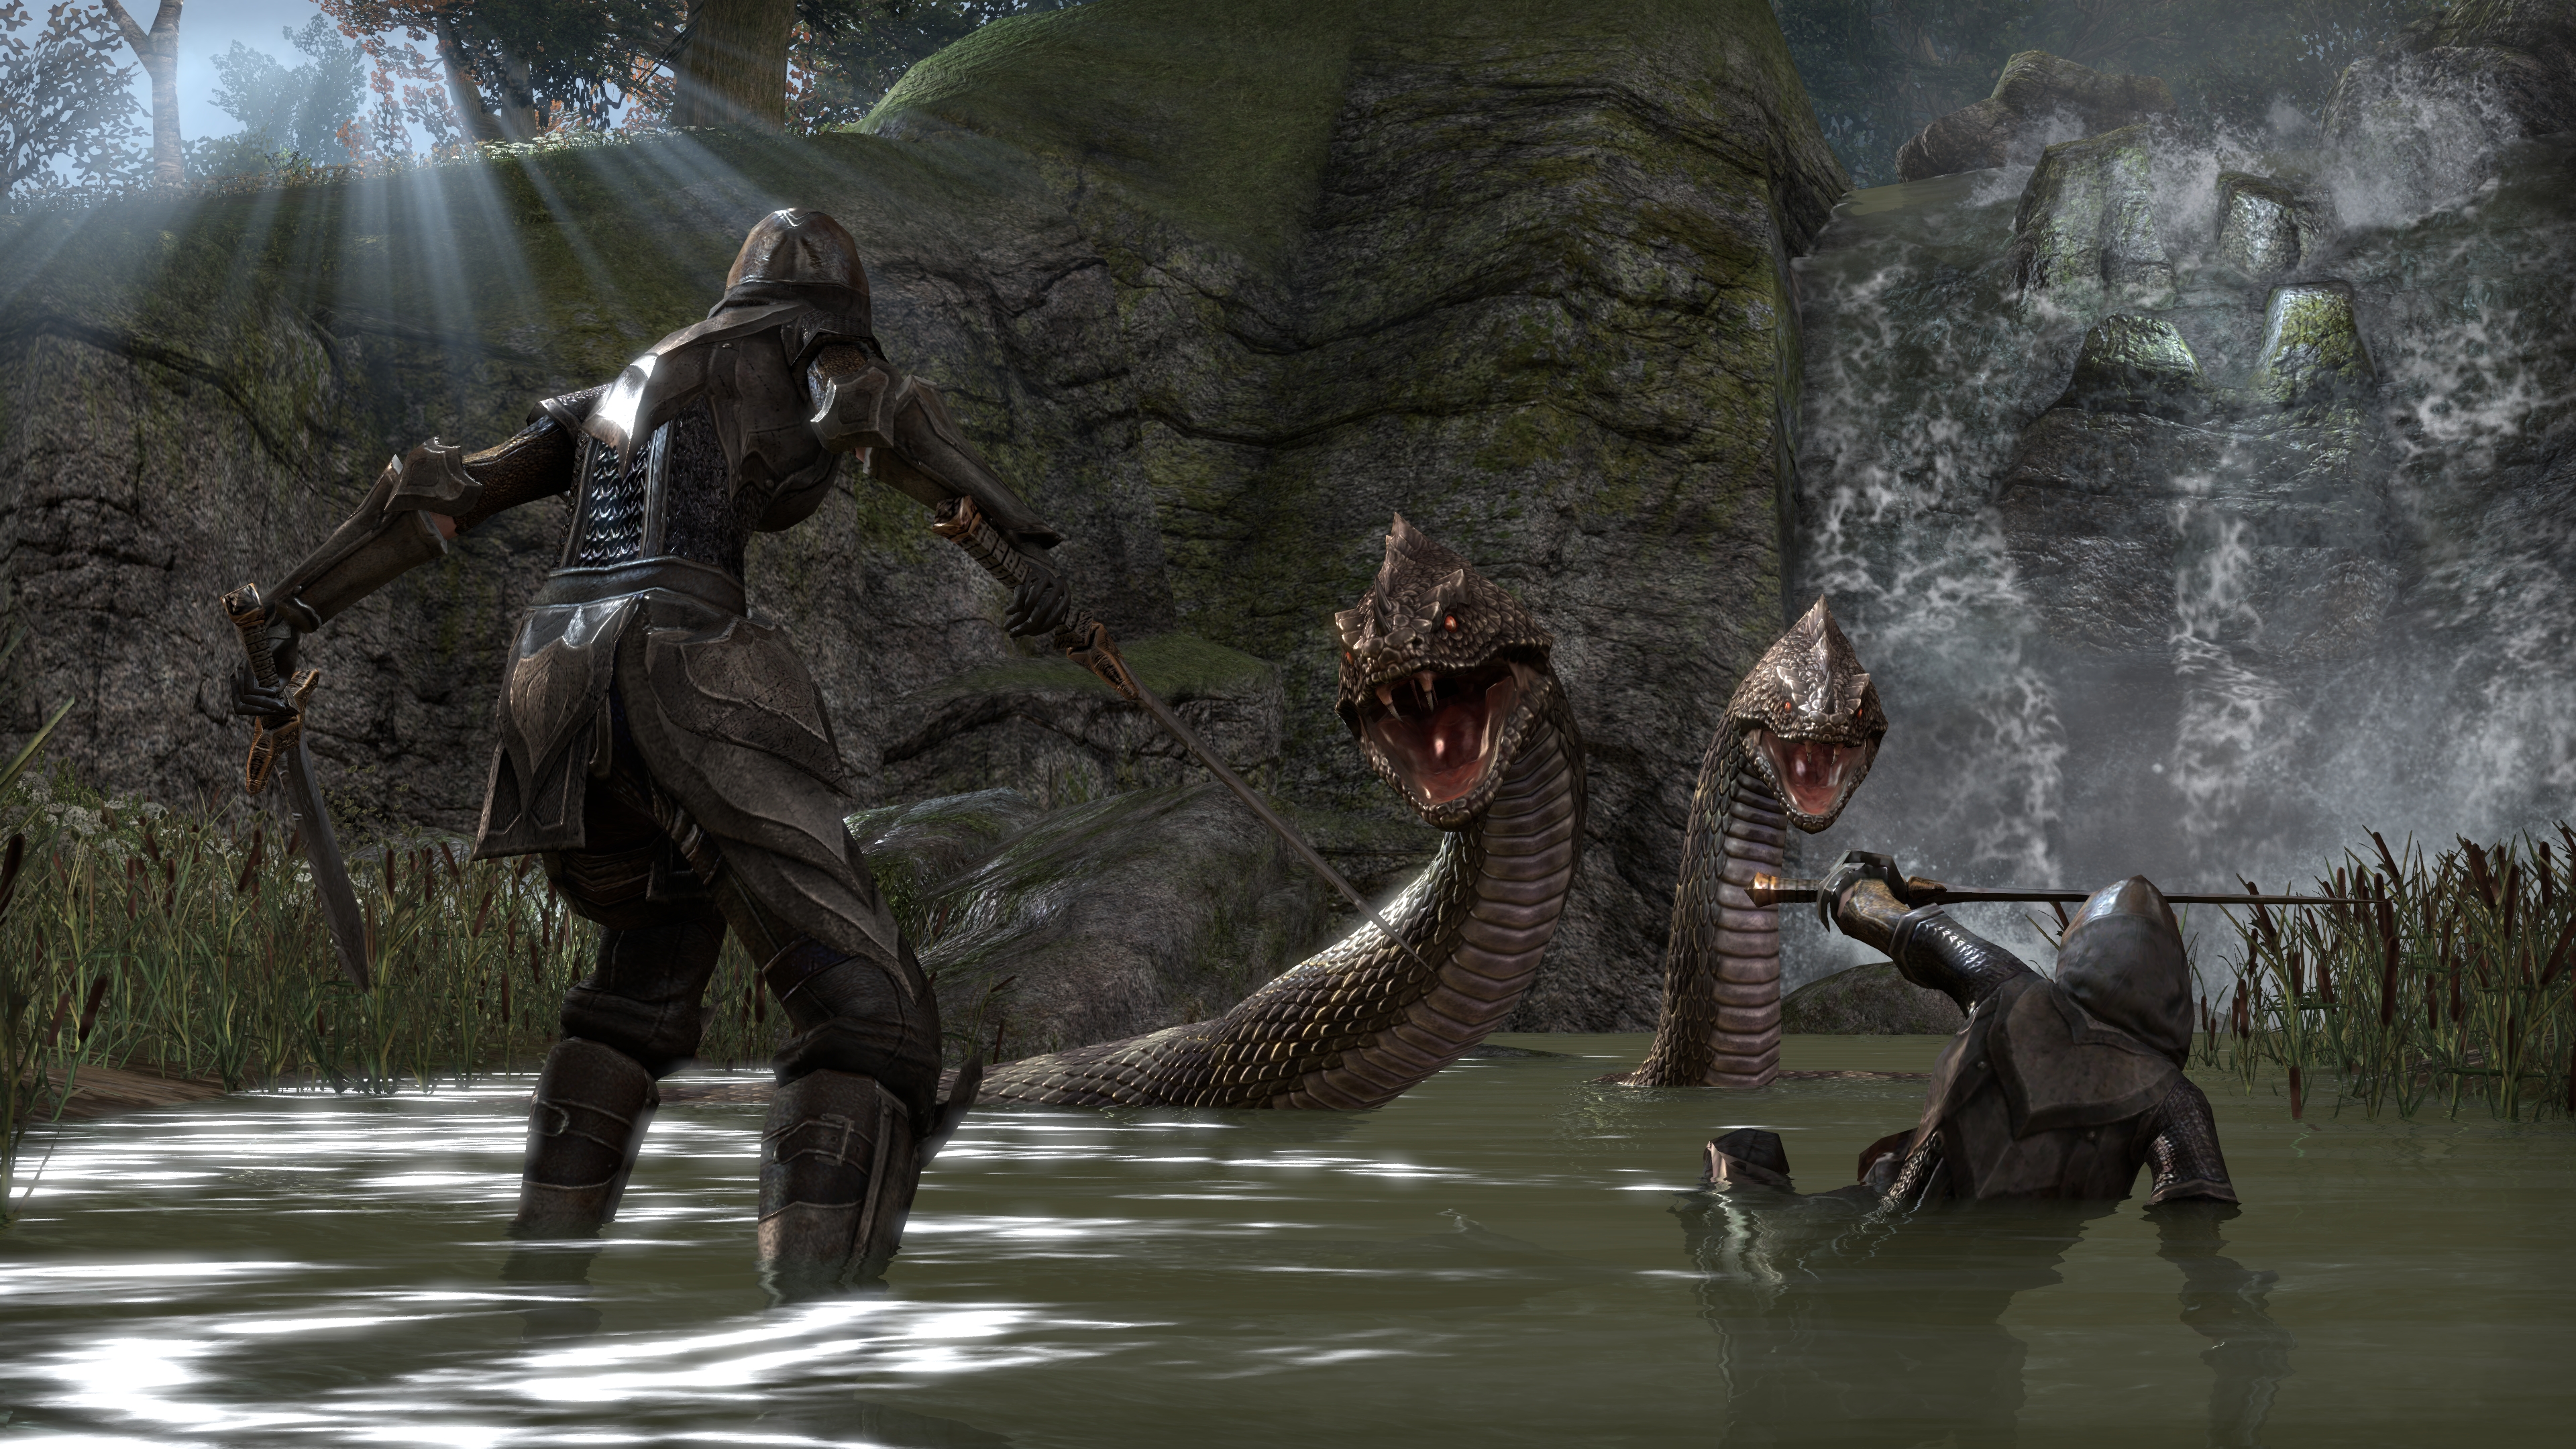 Microsoft: MMOs Like ESO Will Still Require Xbox Live Gold Subscription on Xbox One